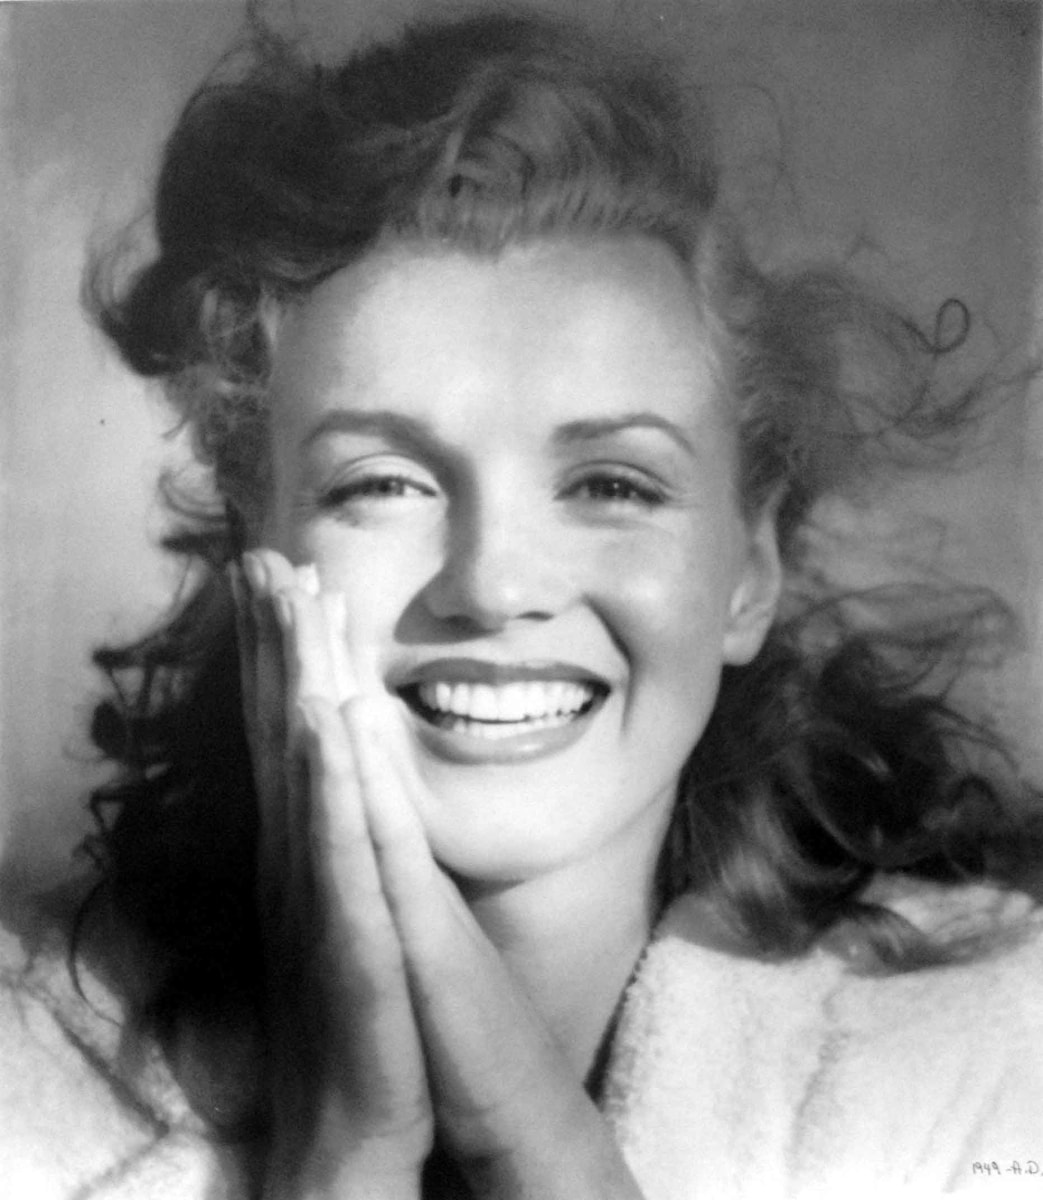 Andre de Dienes Marilyn and California Girls - Exhibitions photo picture